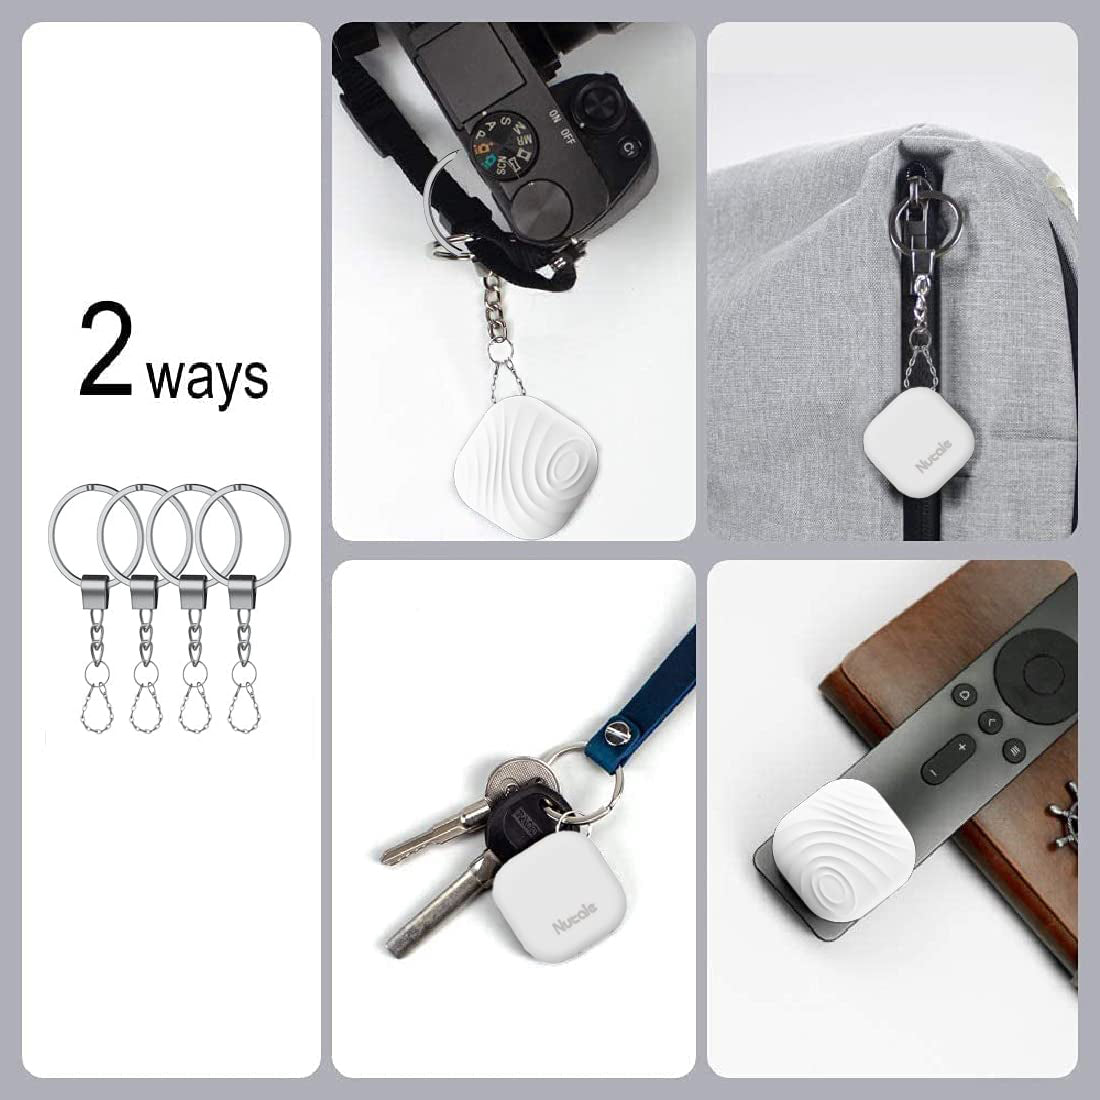 Nutale Key Finder, Bluetooth Tracker Item Locator with Key Chain for Keys Pet Wallets or Backpacks and Tablets, Batteries Include (White, 4 Pack)